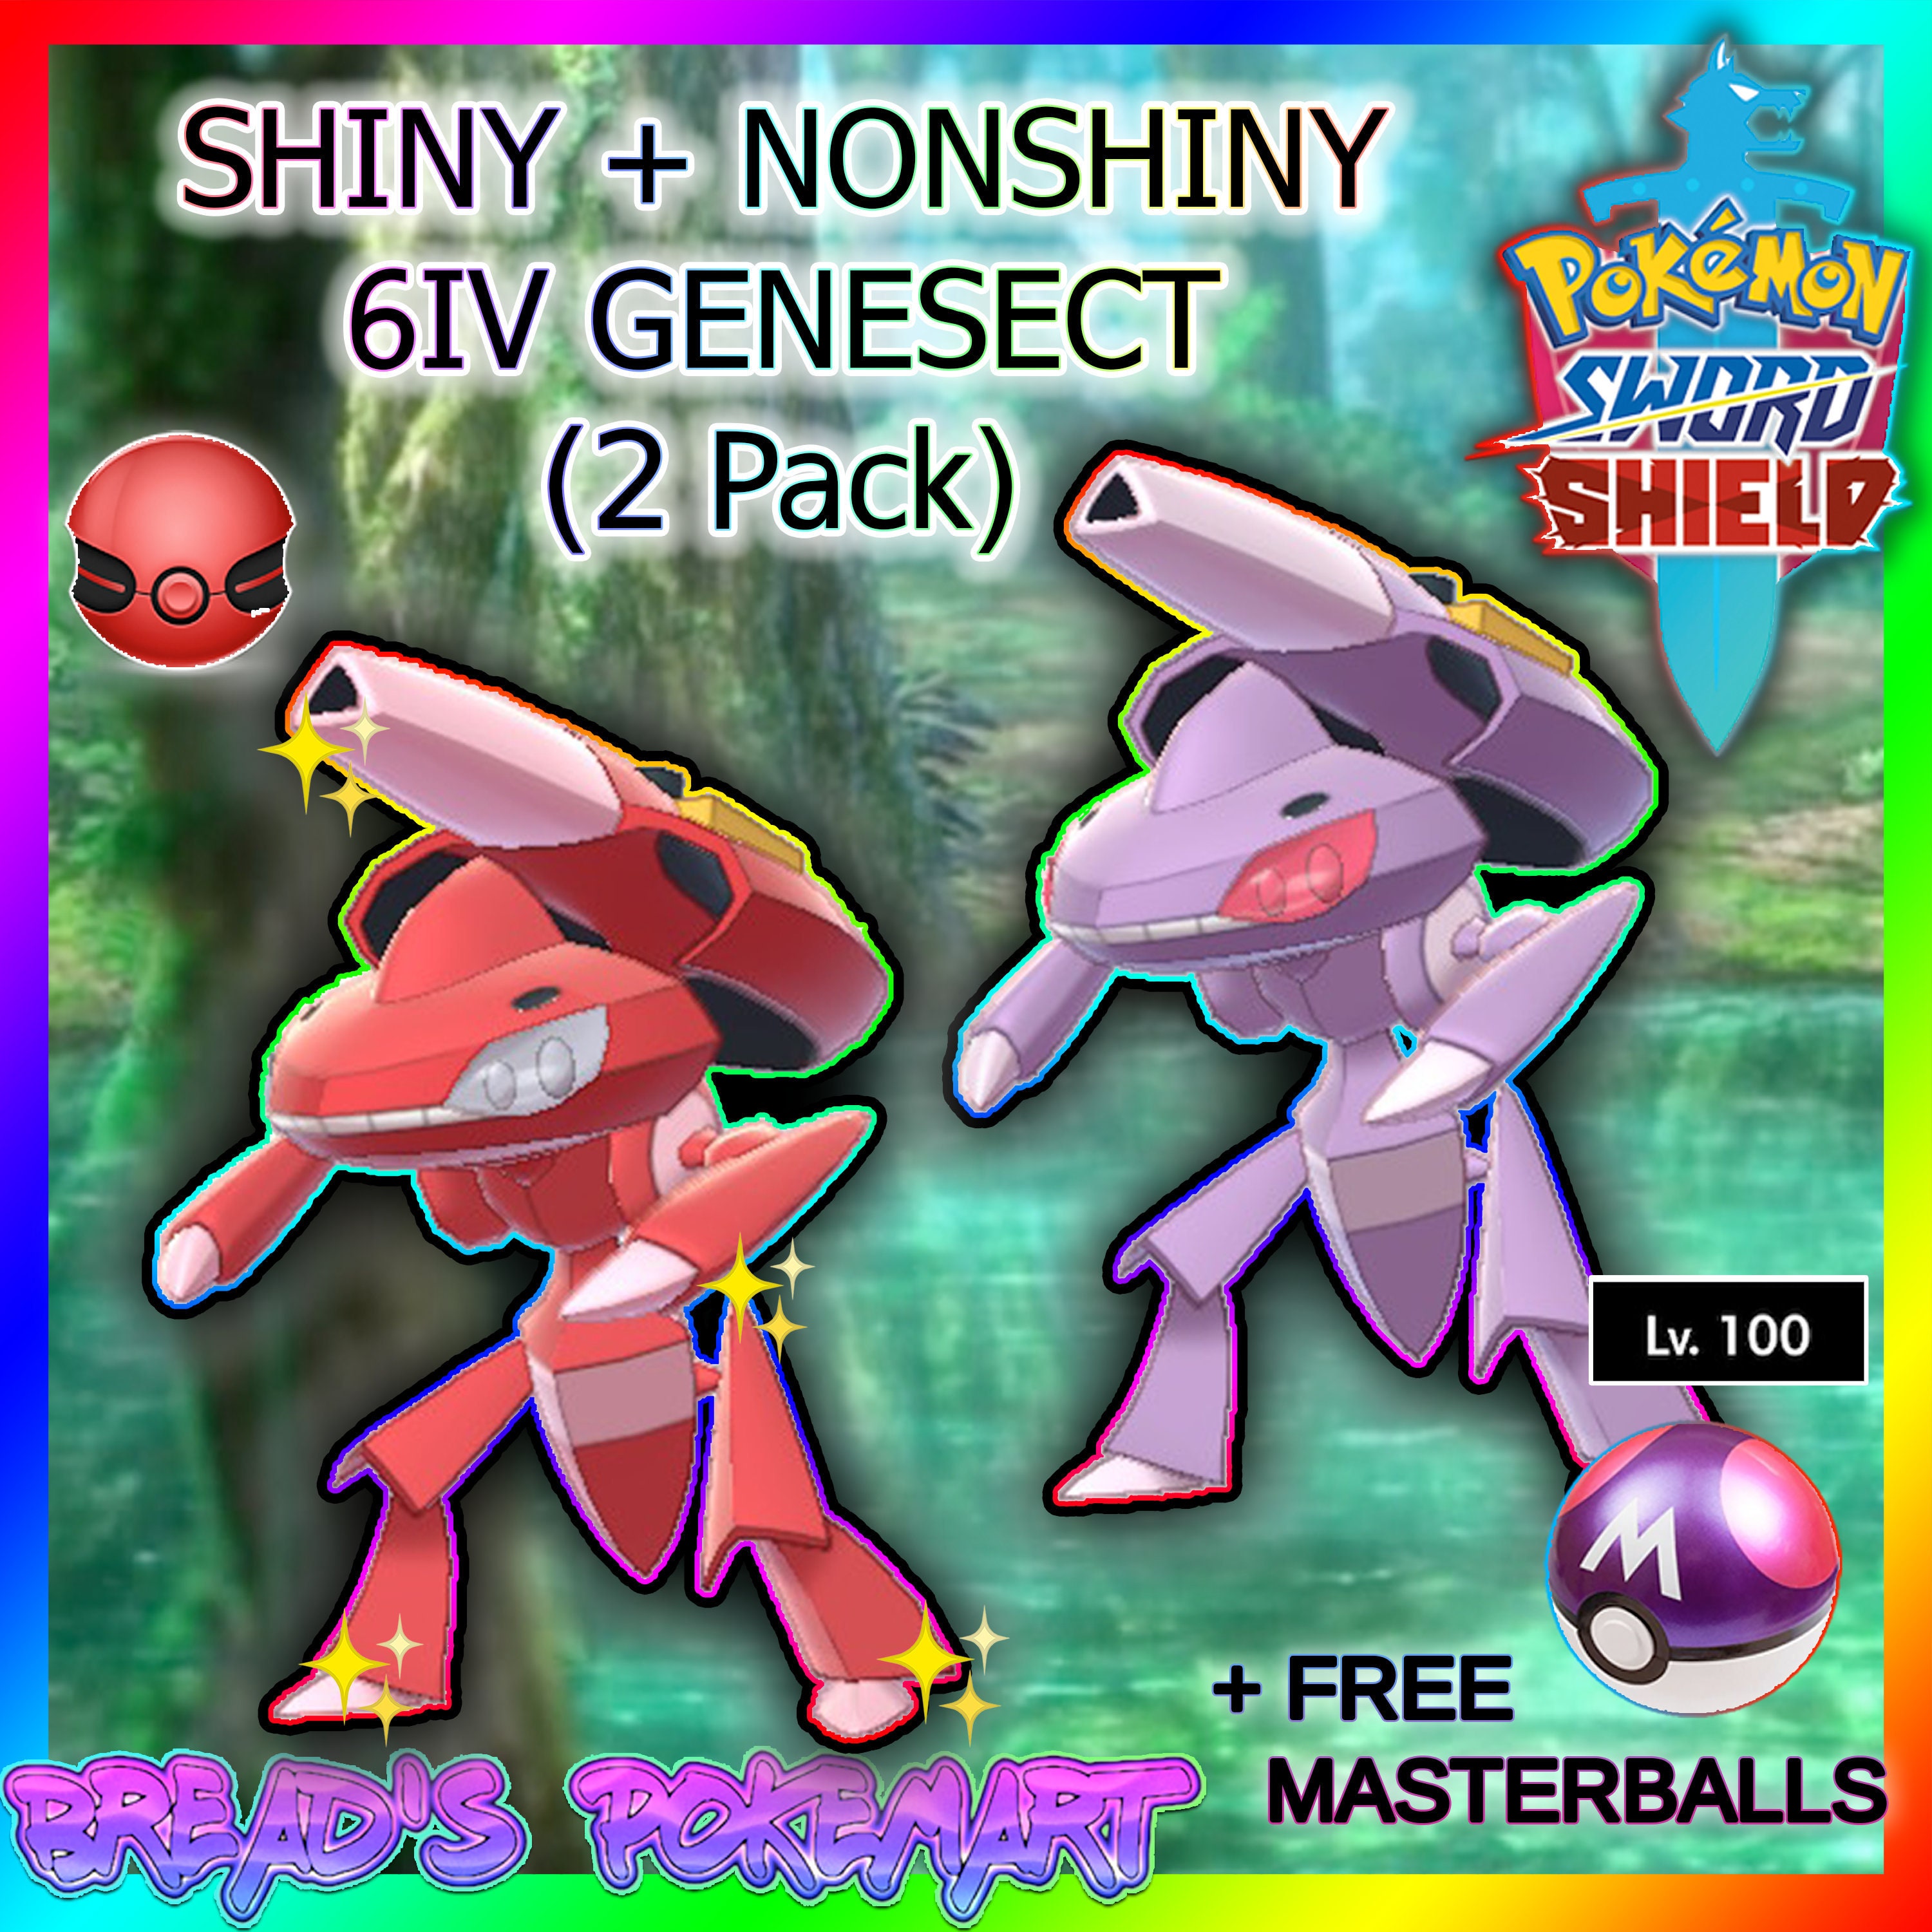 Getting LUCKY with Shiny Genesect! Catching RARE Mythical Shiny